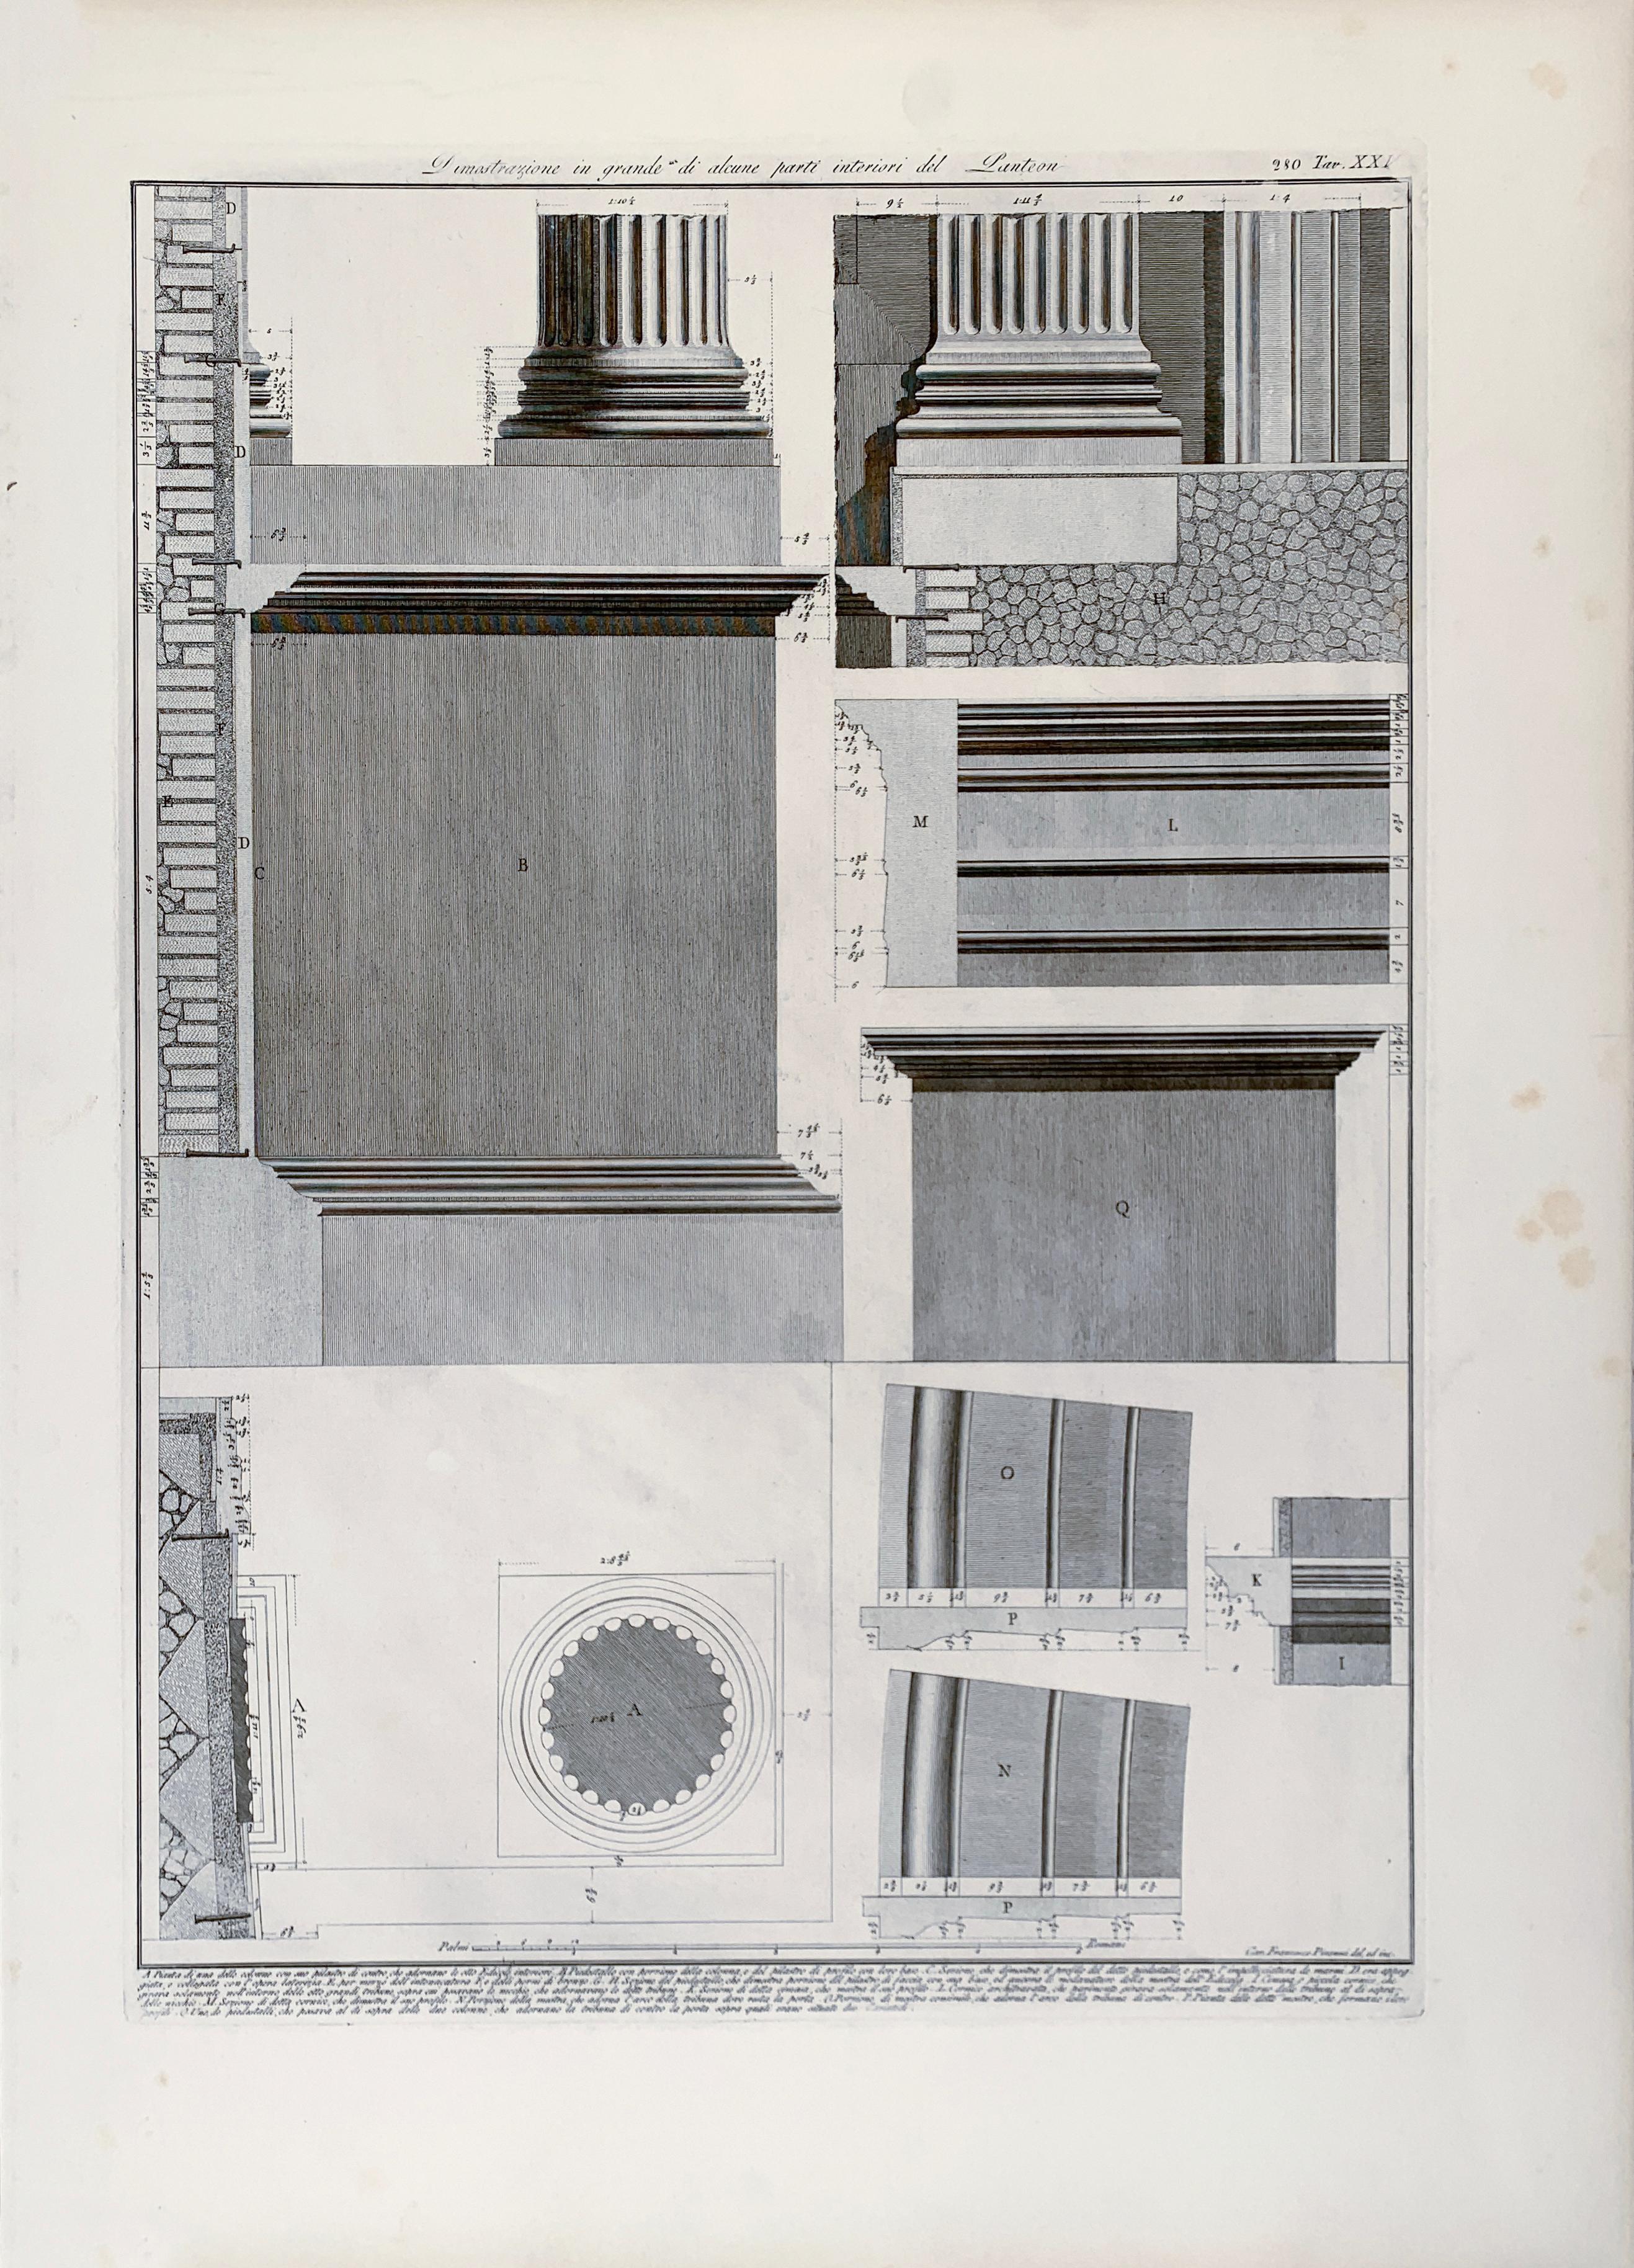 Architectural Elements of the Interior of the Pantheon in Rome